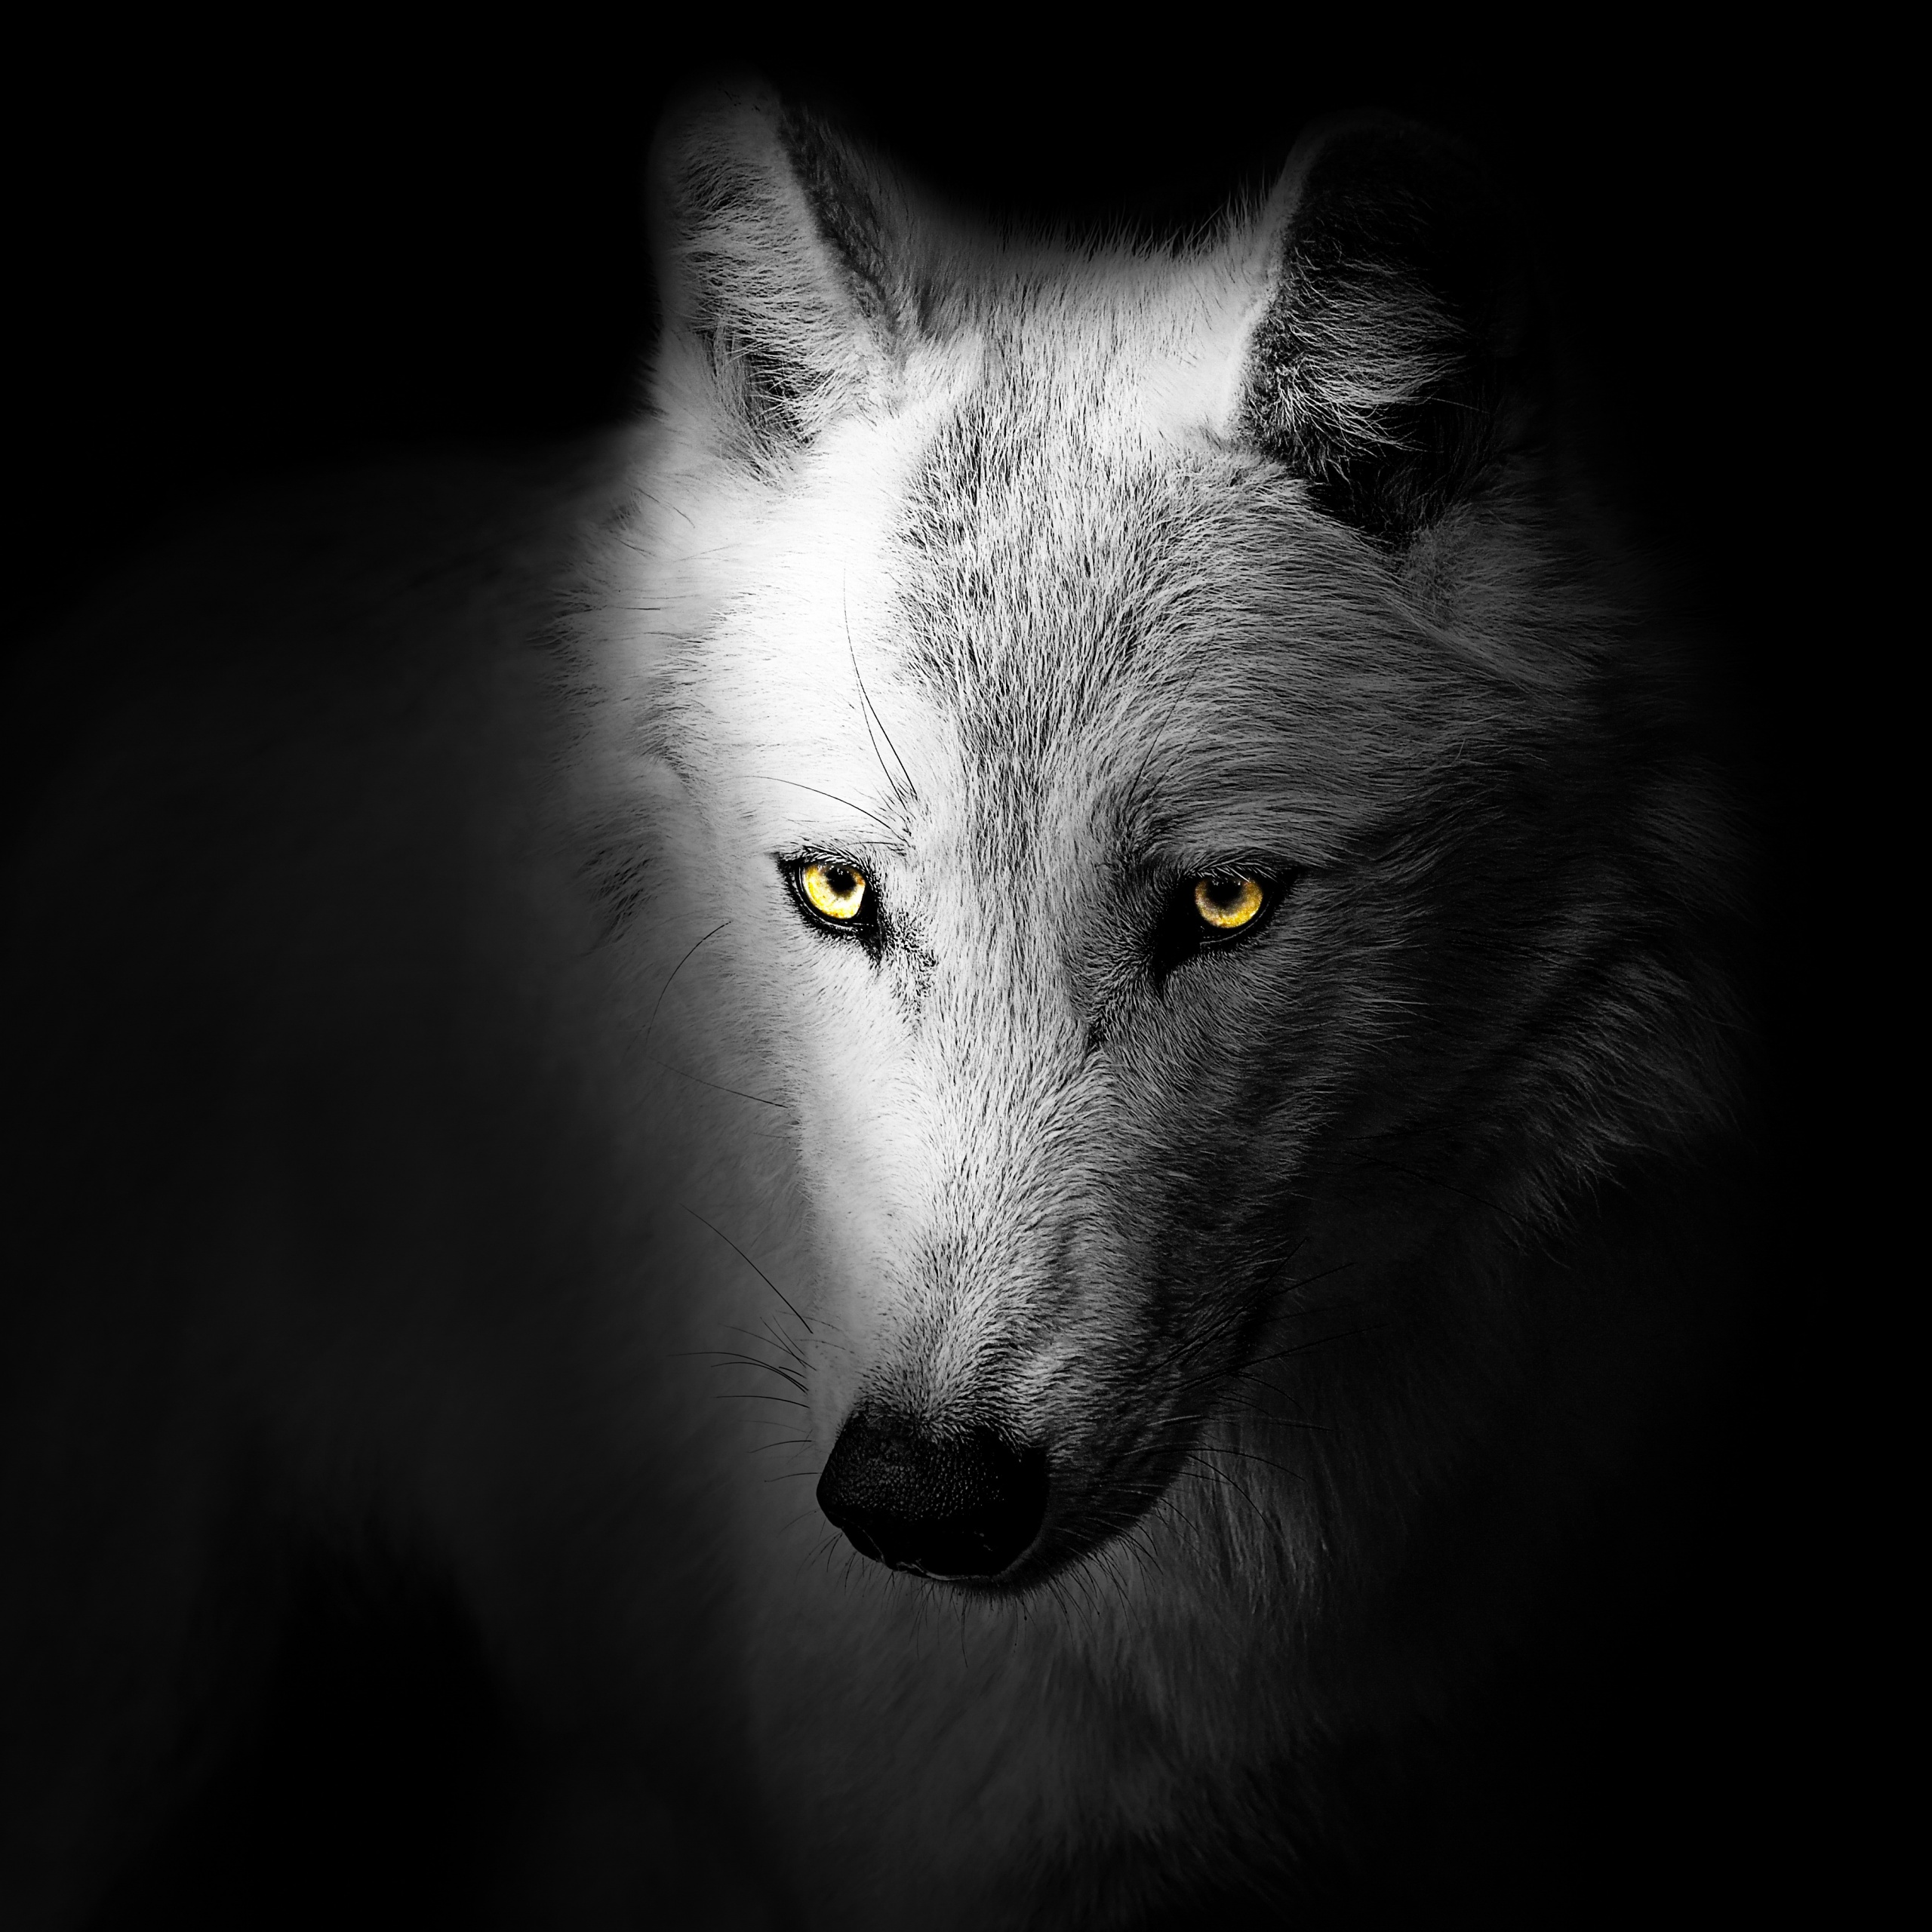 Scary Wolf Wallpapers  HD Wallpapers  ID 22202